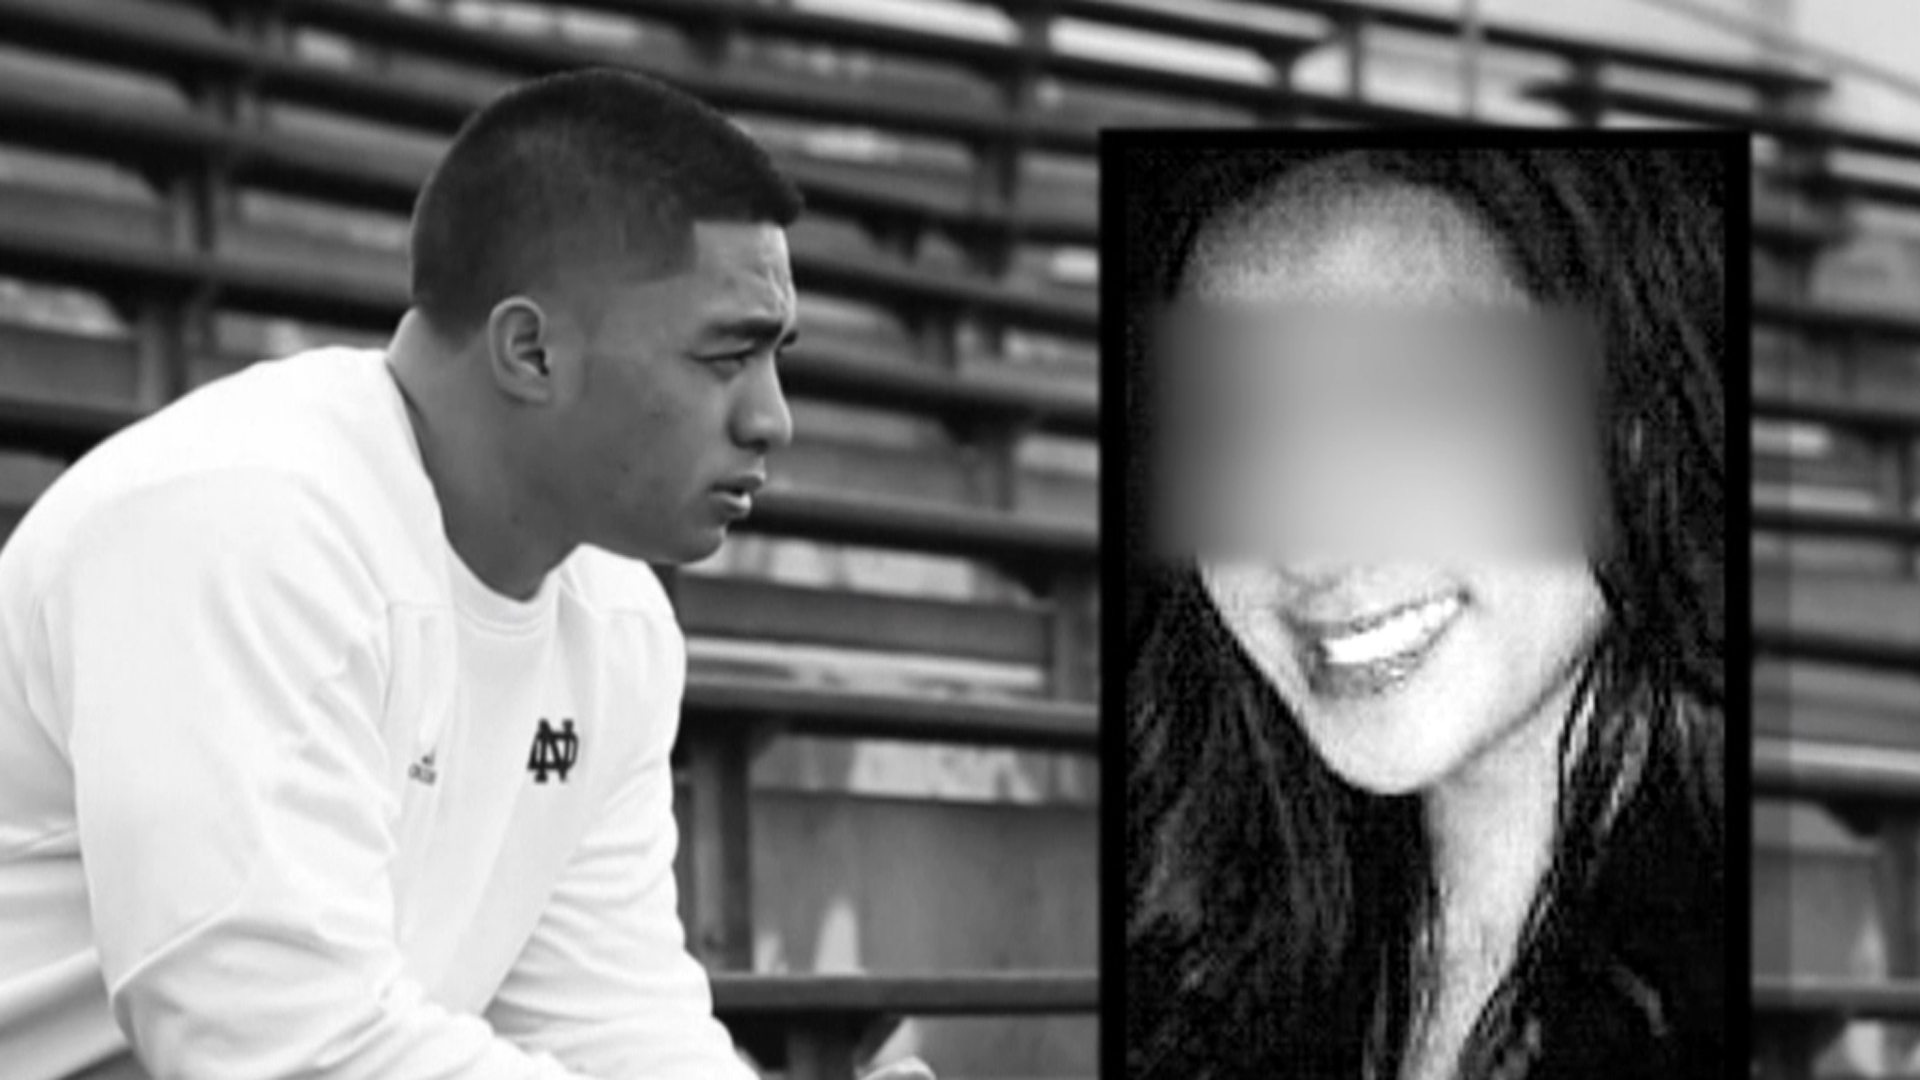 Diane Omeara Woman In Fake Manti Teo Girlfriend Photo Speaks Out Cbs News 